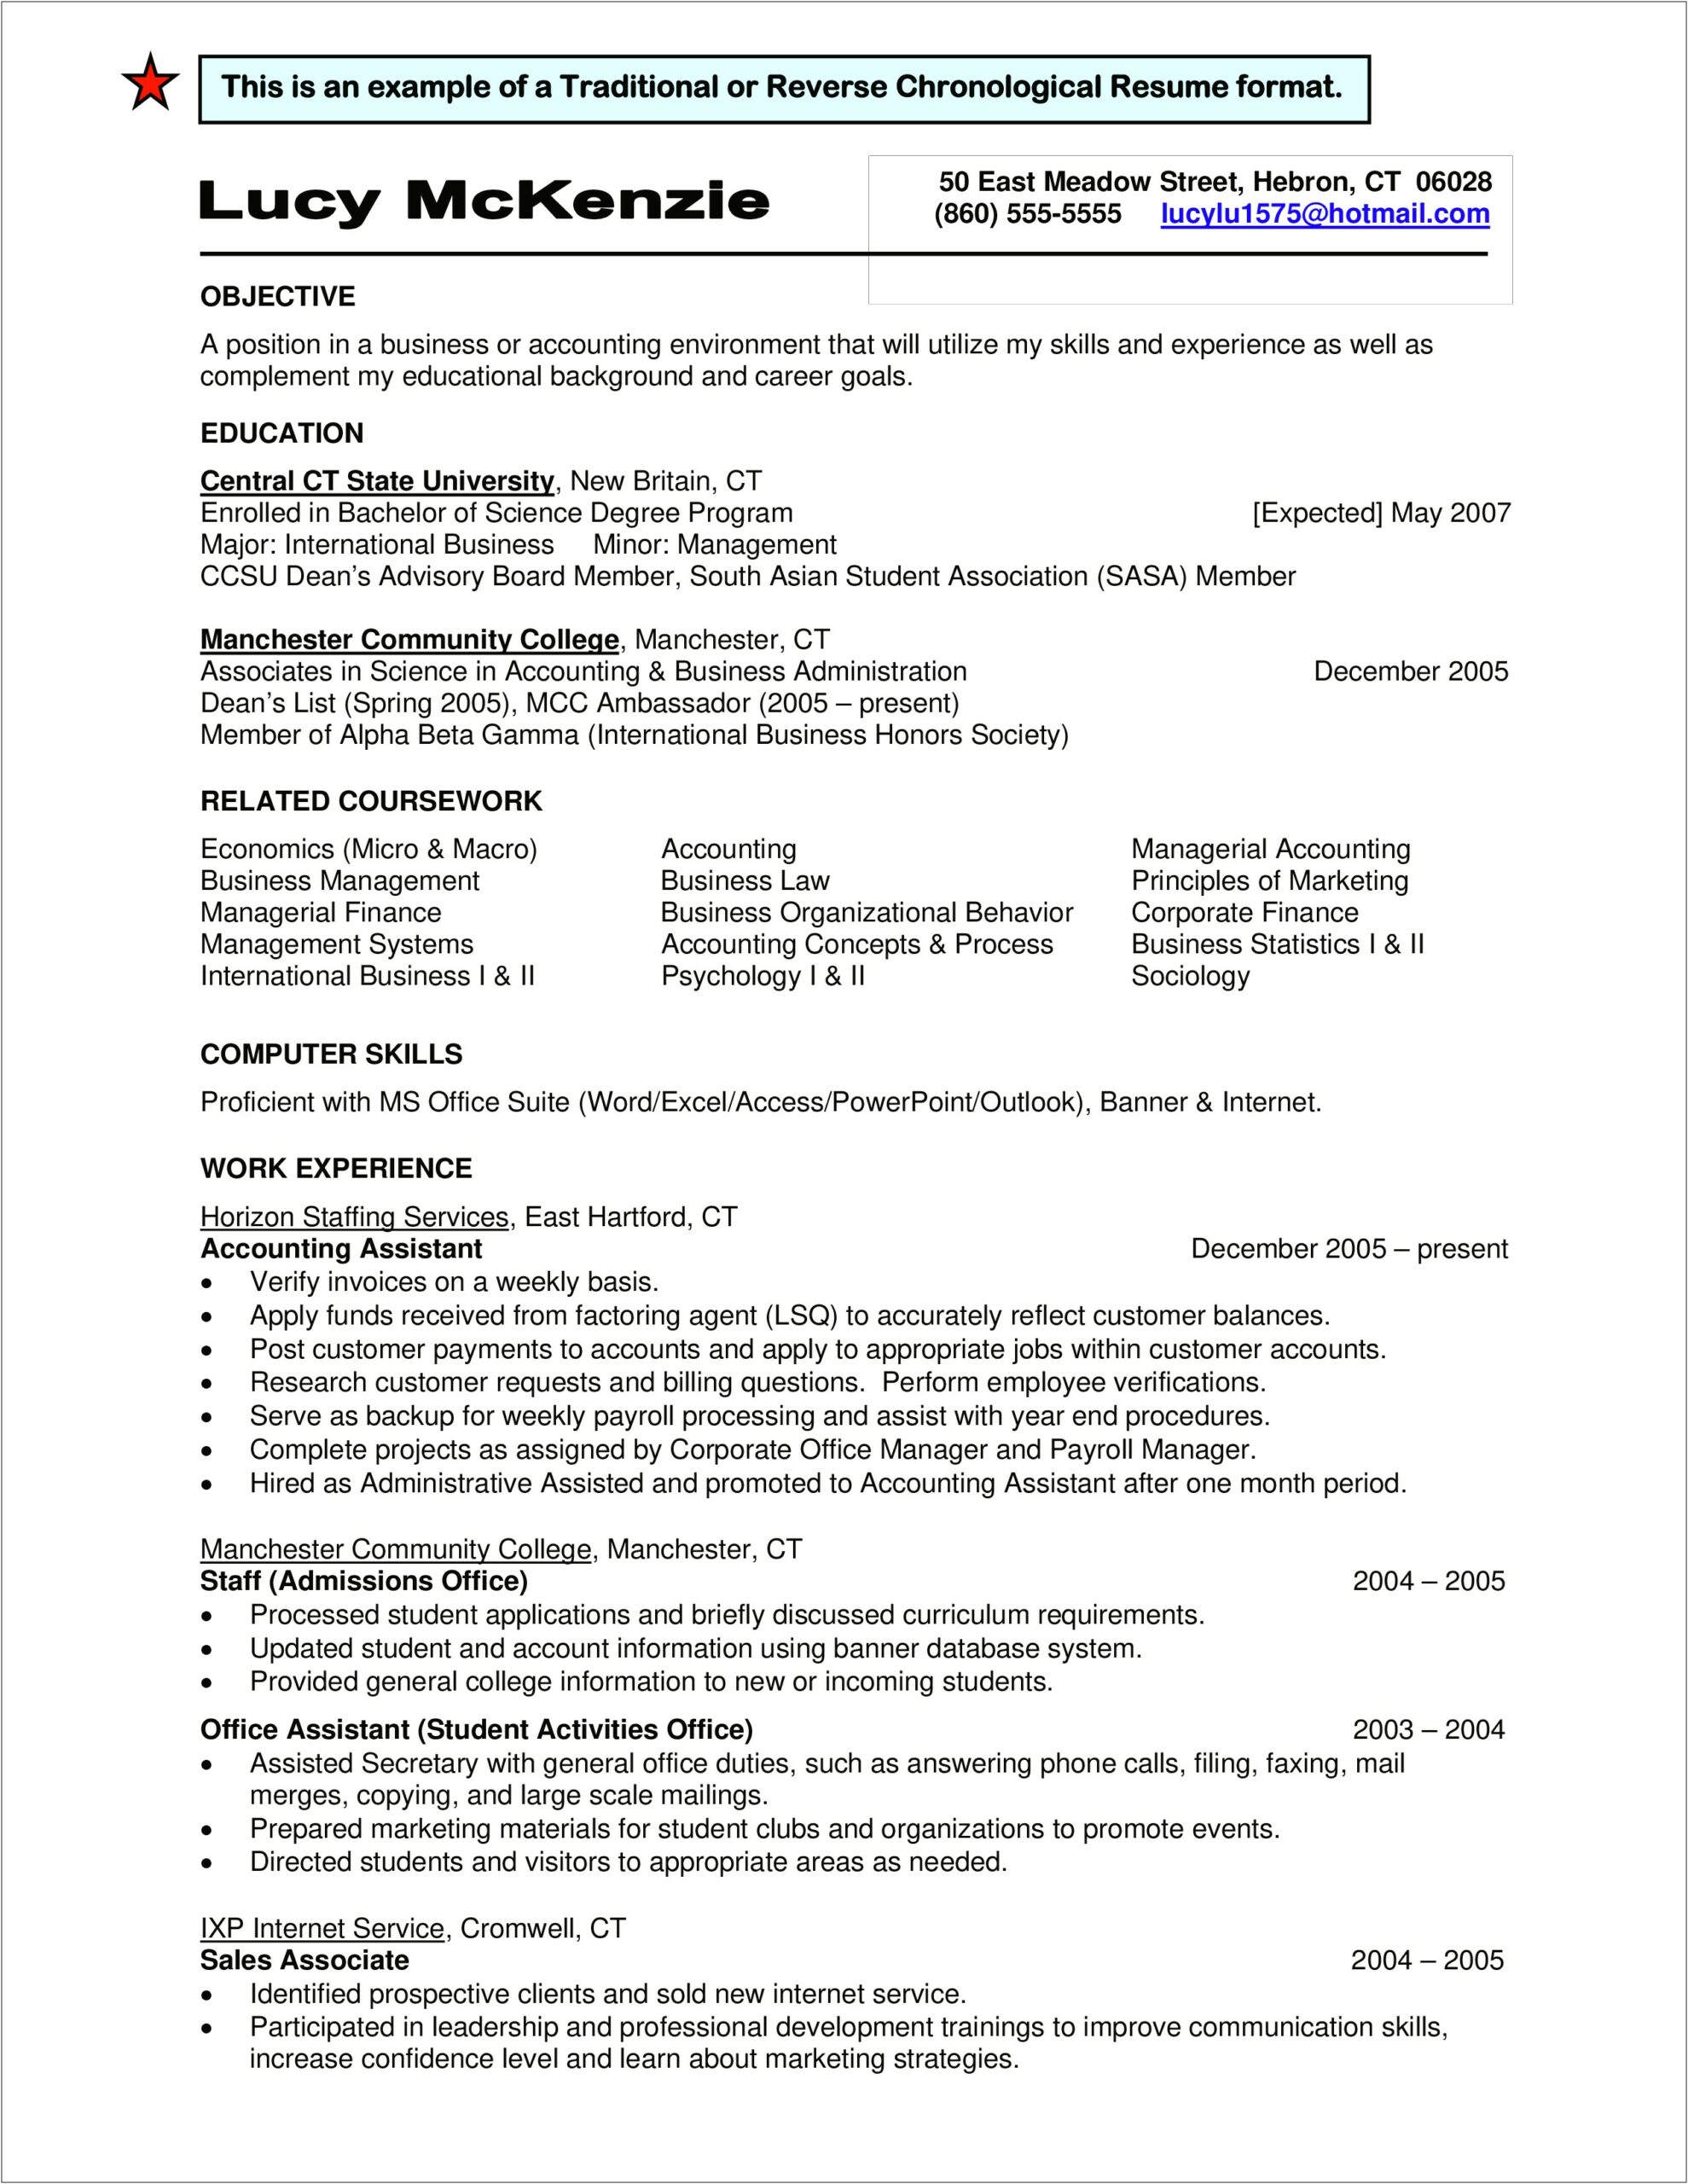 Example Reverse Chronological Resume Template